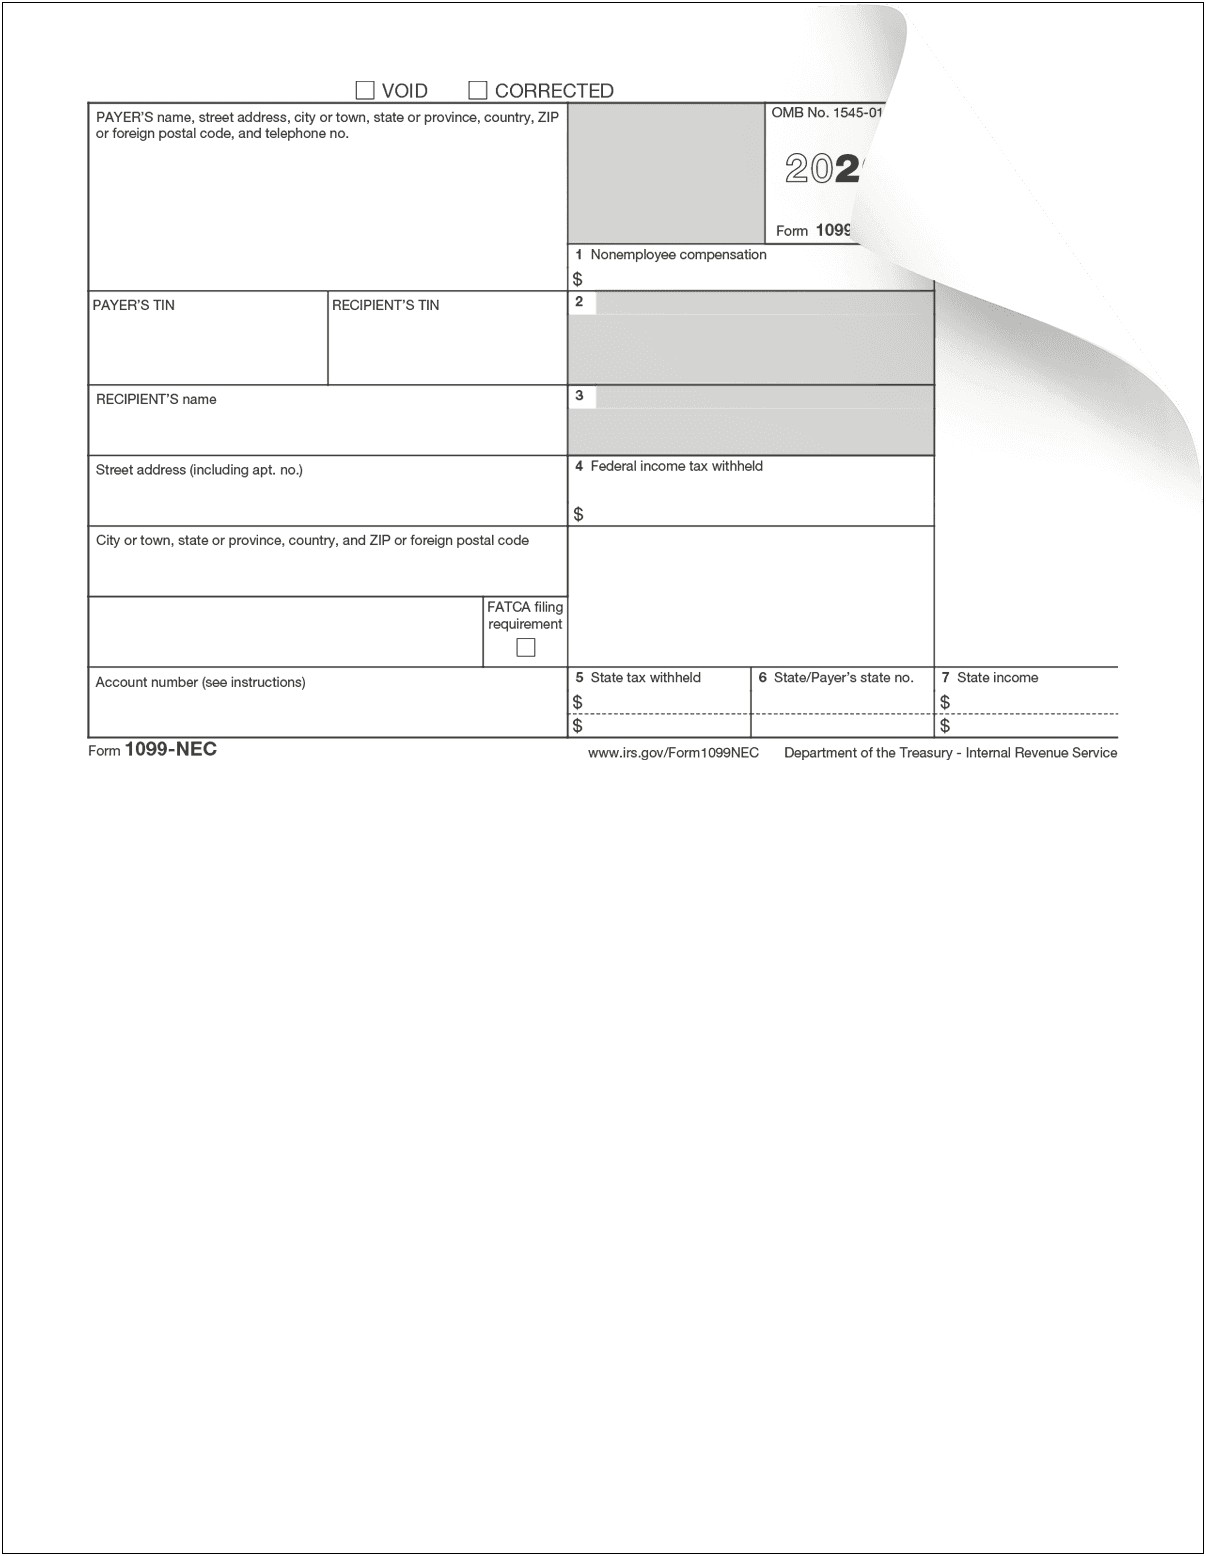 Microsoft Word Template For Irs Form 1099 Misc